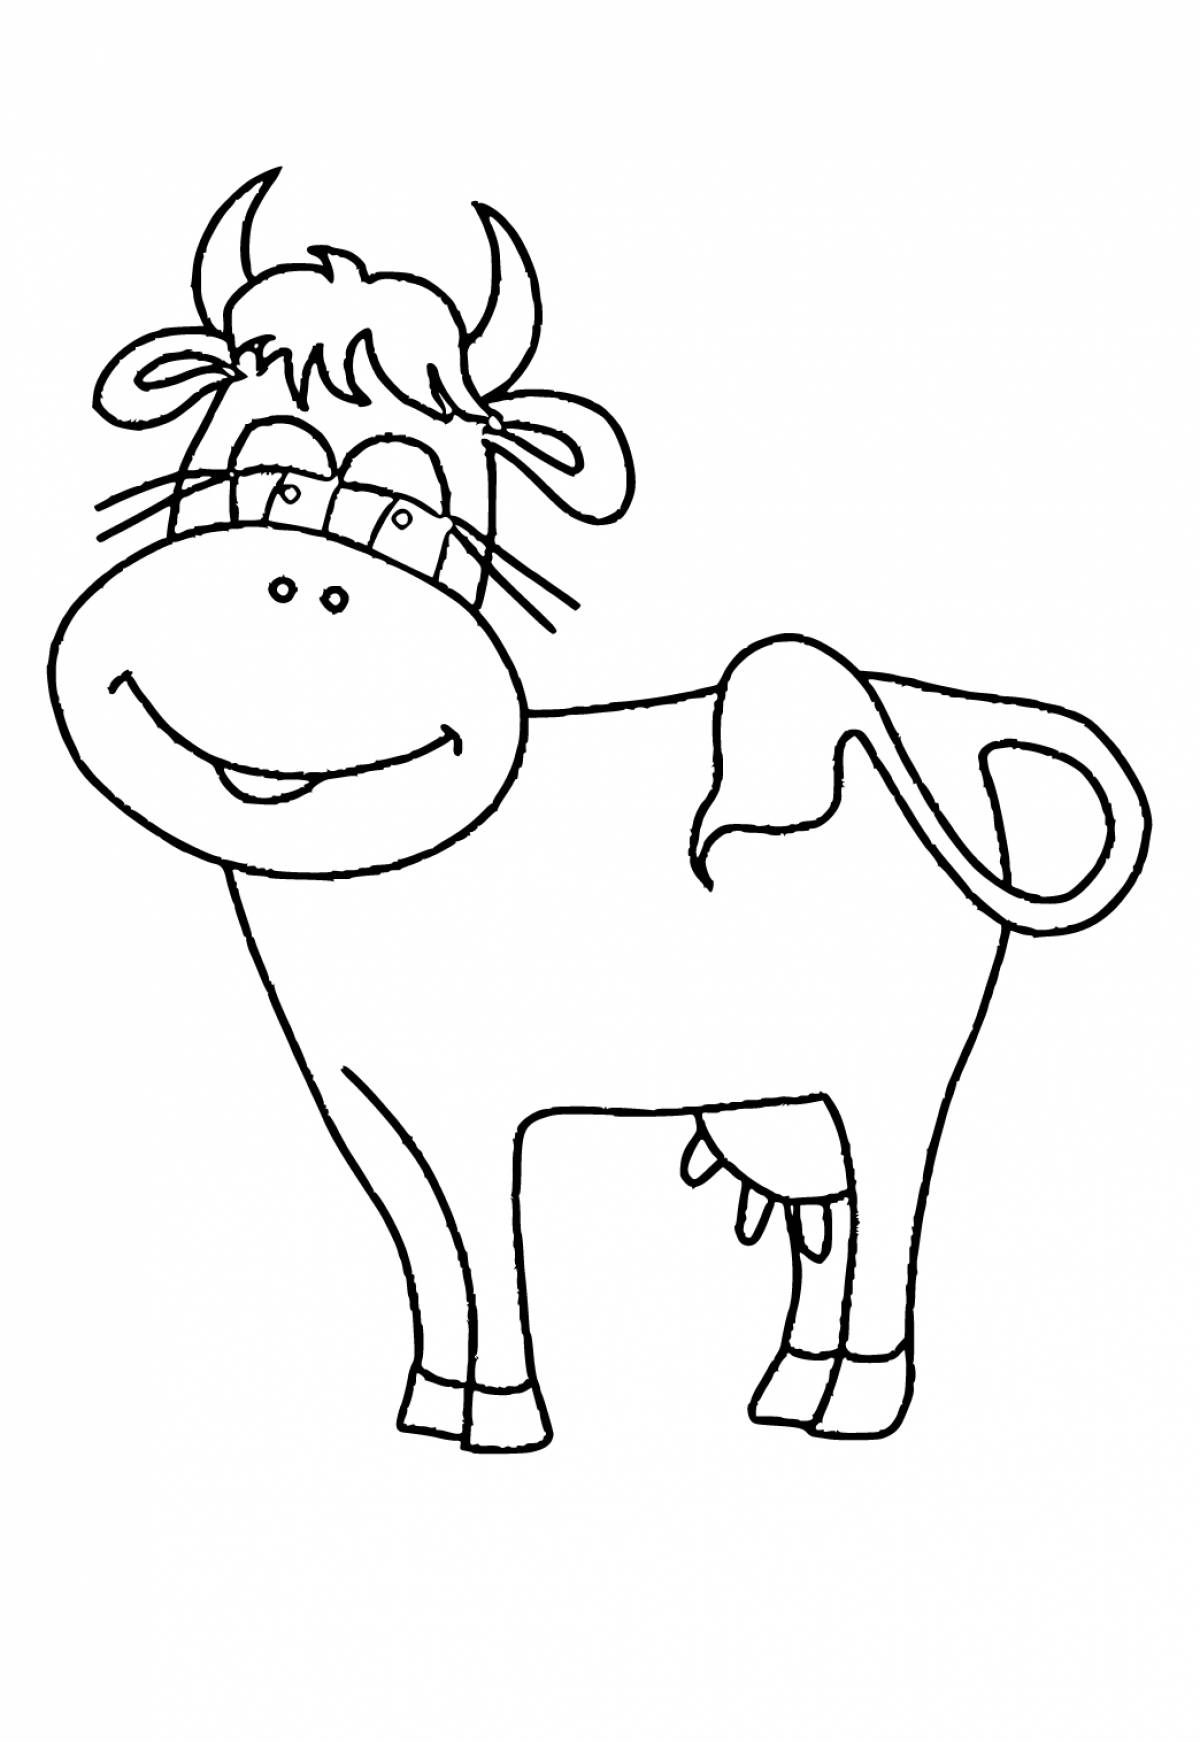 A funny cow coloring book for 5-6 year olds